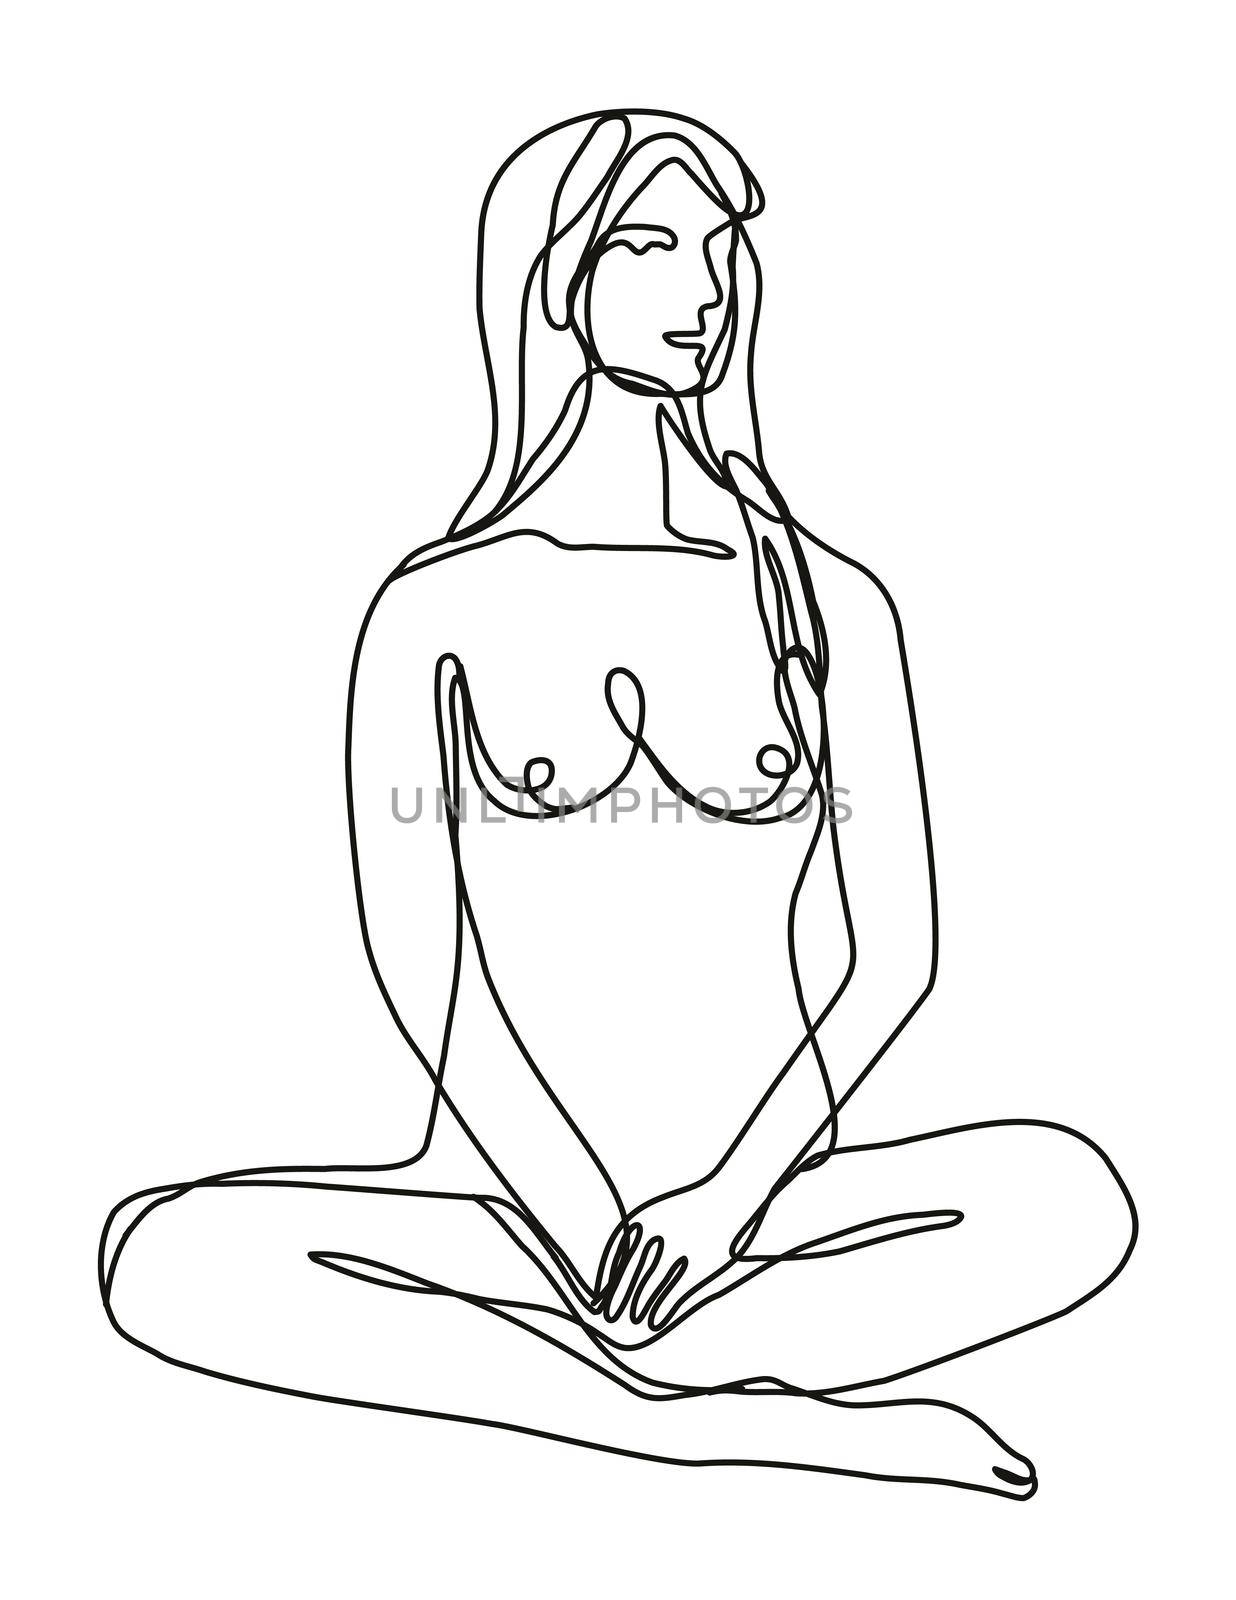 Continuous line drawing illustration of a female nude sitting in Lotus Position front view done in doodle style in black and white on isolated background. 